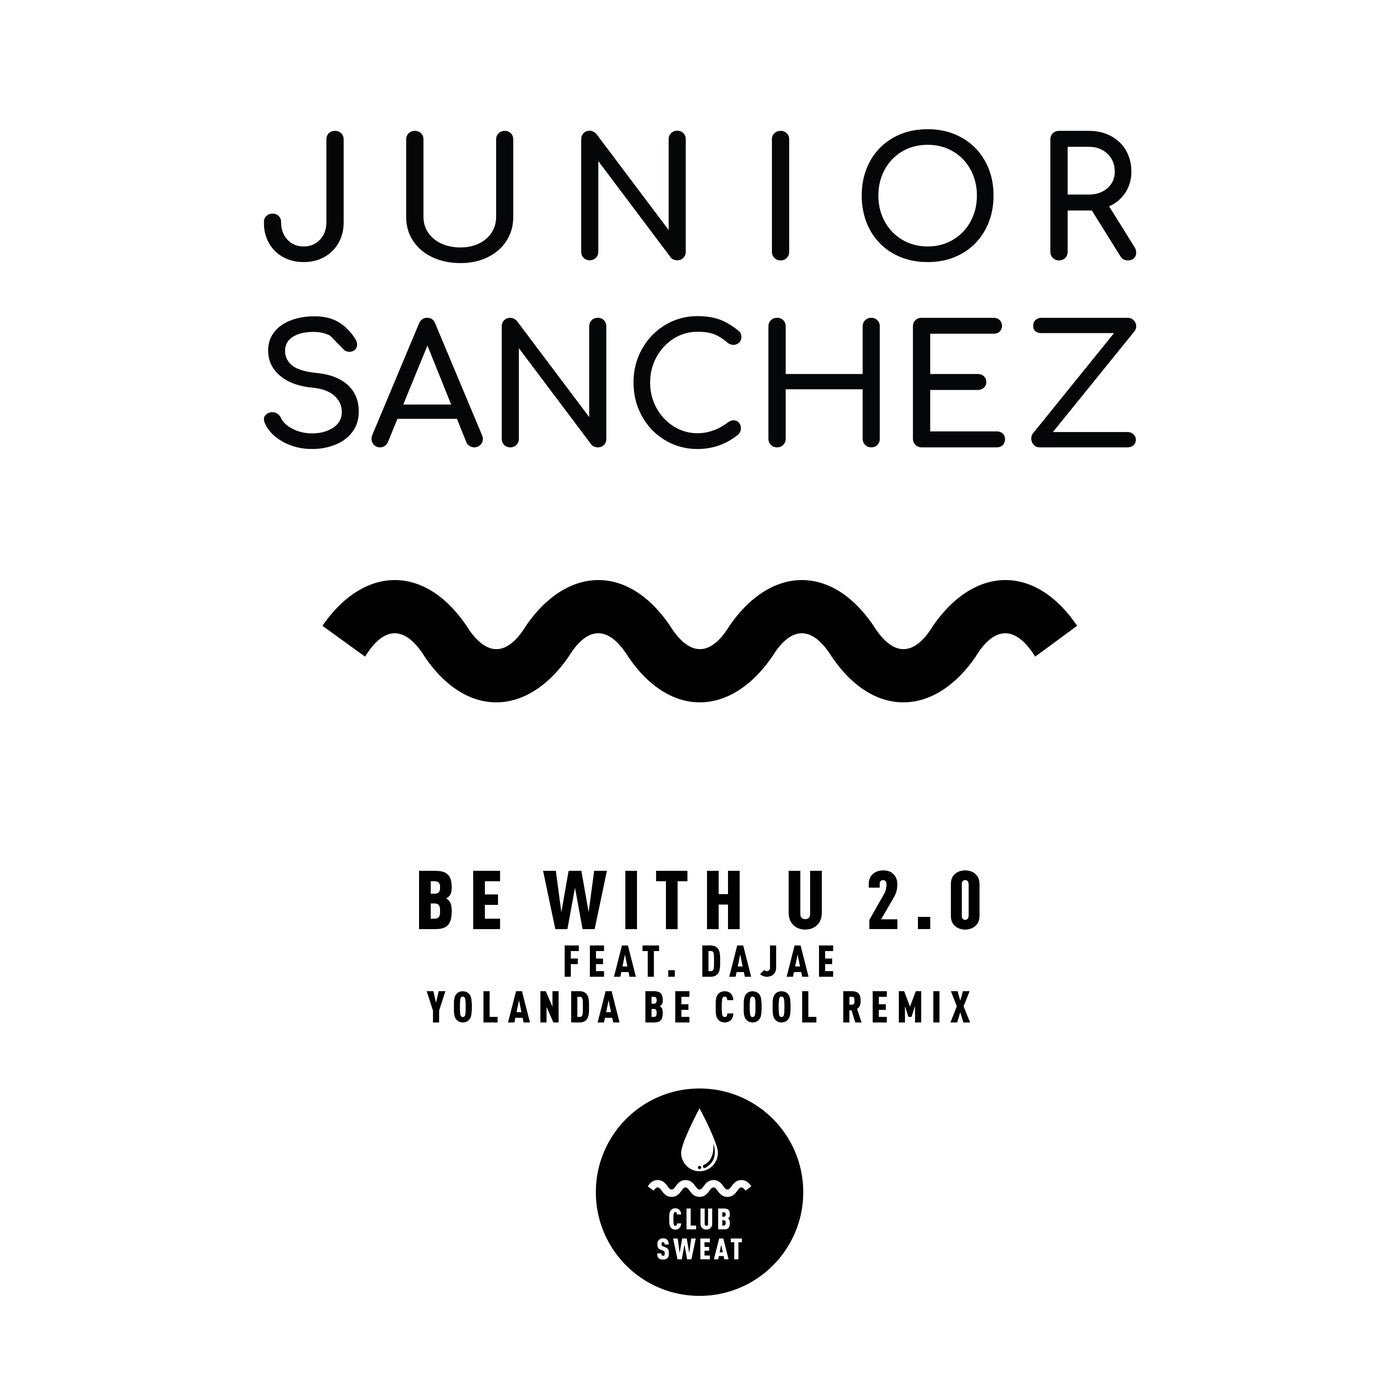 Junior Sanchez - Be with U 2.0 feat Dajae (Yolanda Be Cool Extended Remix) [CLUBSWE376]